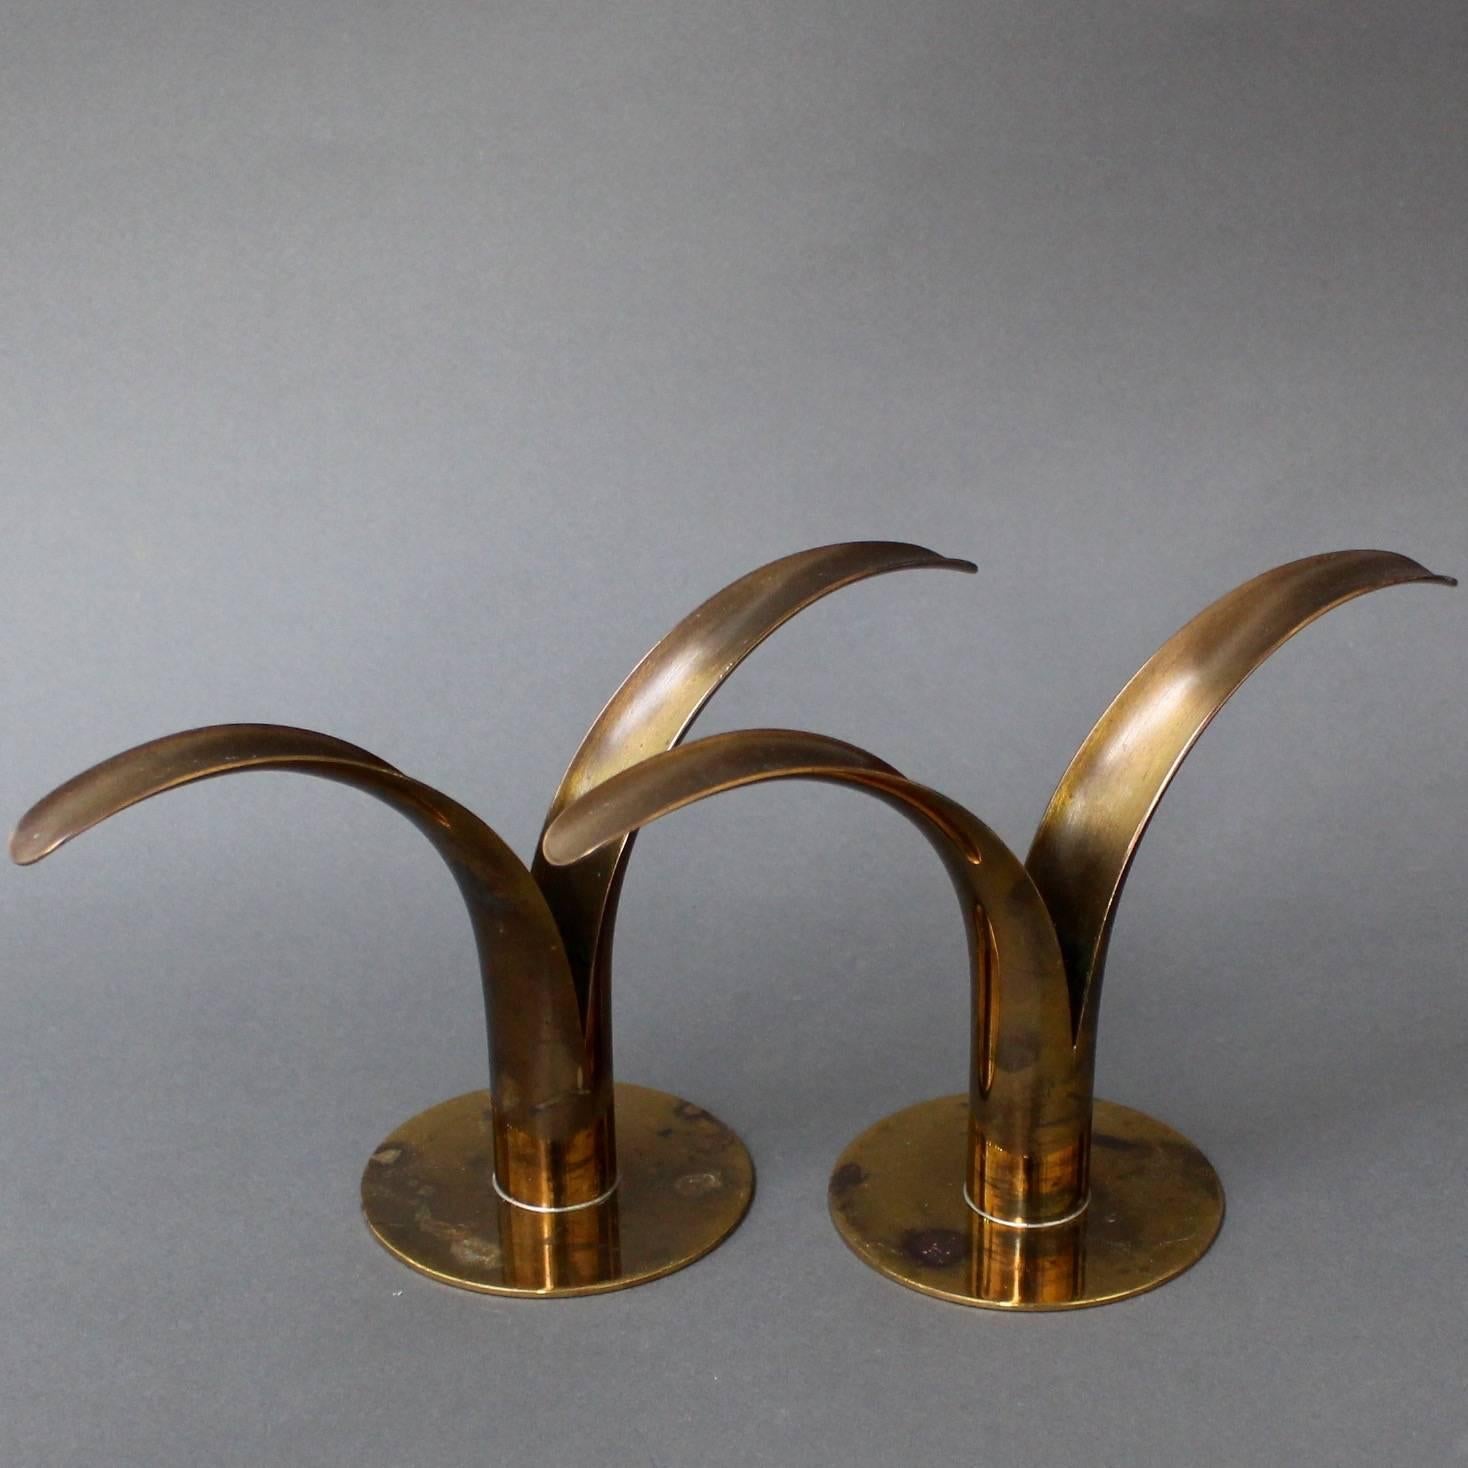 20th Century Pair of Midcentury Split Leaf Lily Candle Holders by Scan Sweden